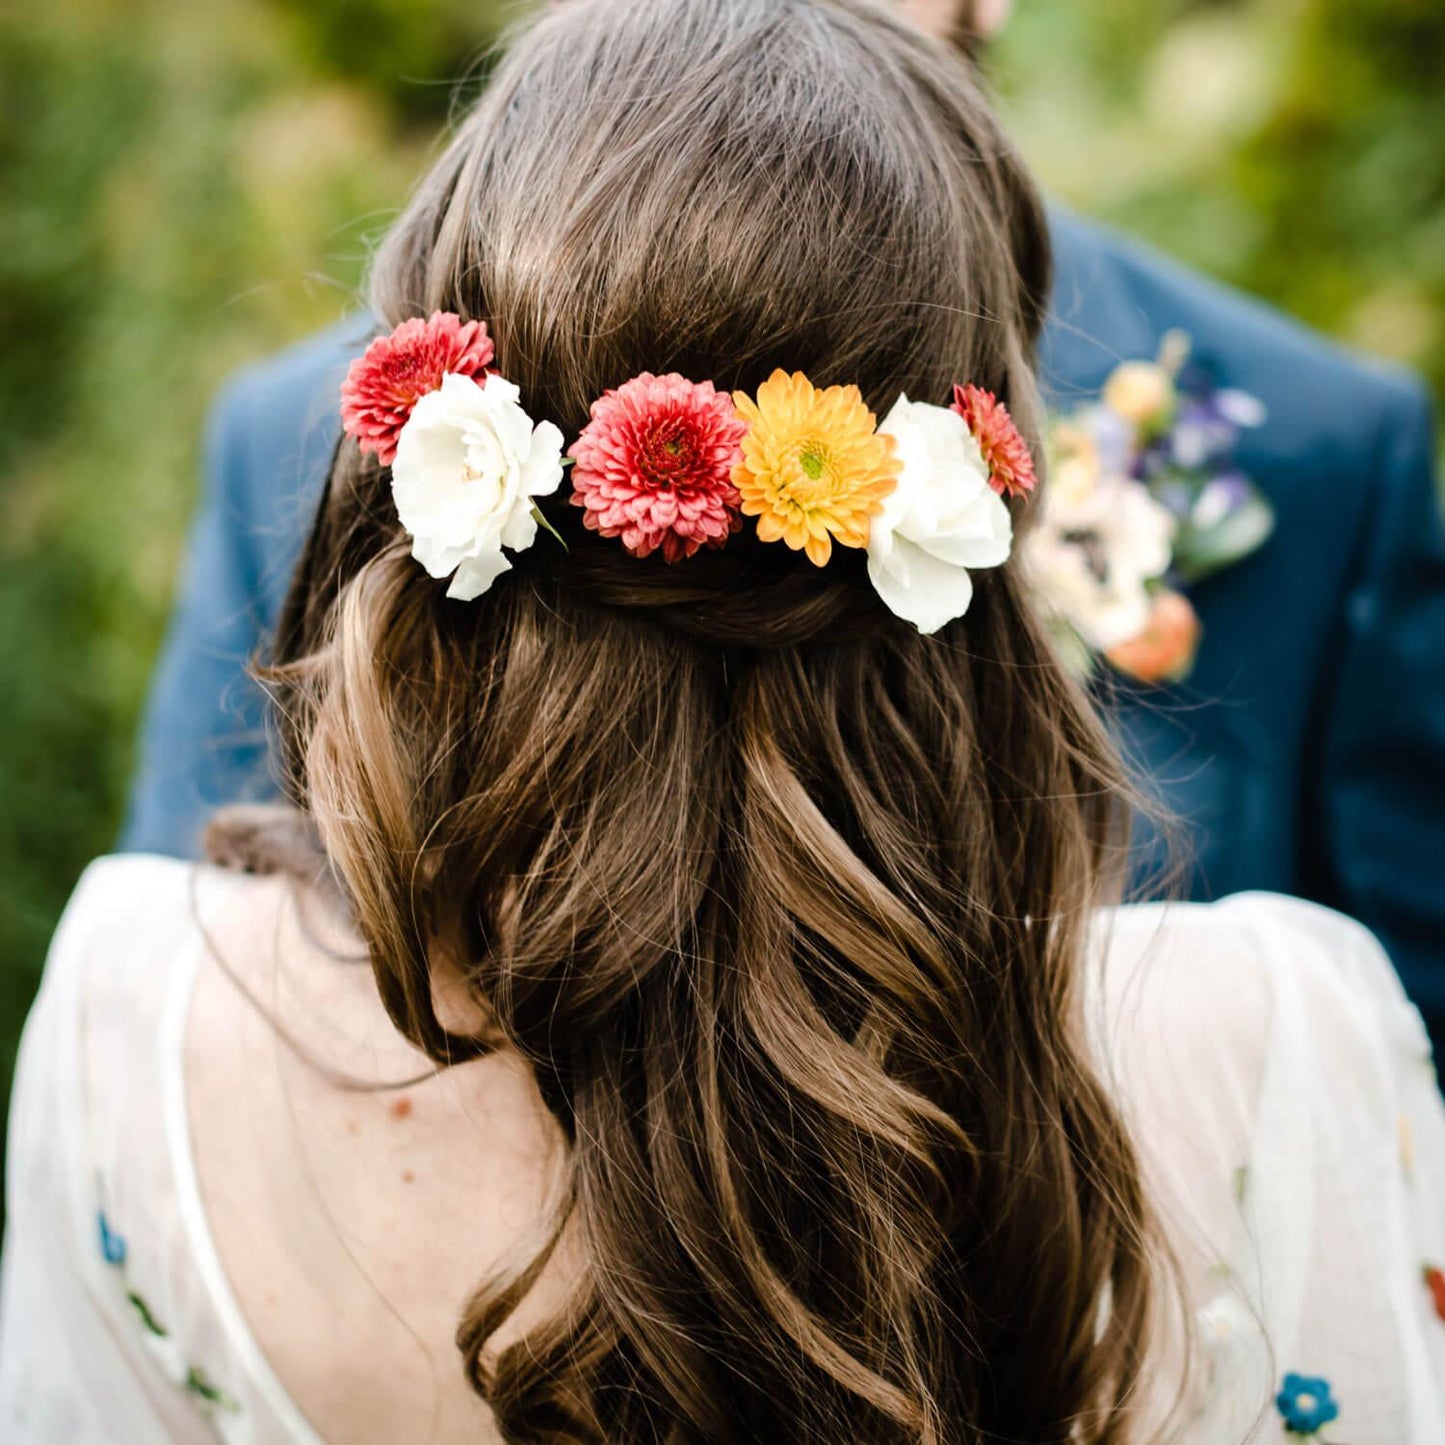 A person with a floral crown made of colorful flowers in their hair, viewed from behind. Order online for wedding & event flowers from the best florist in Toronto near you.